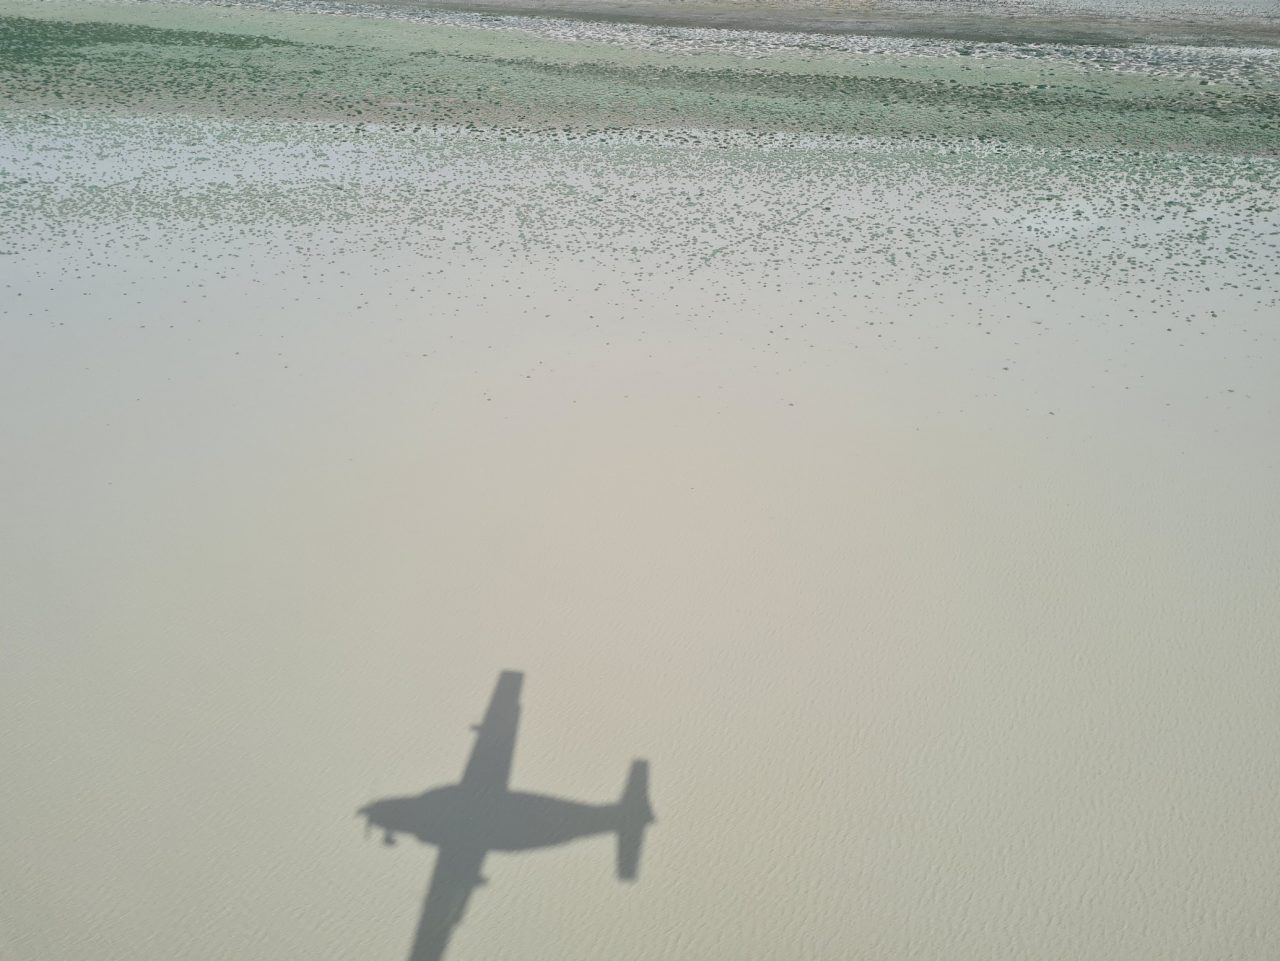 aerial photo of inland desert lake with light brown water. Plane shadow in foreground. 